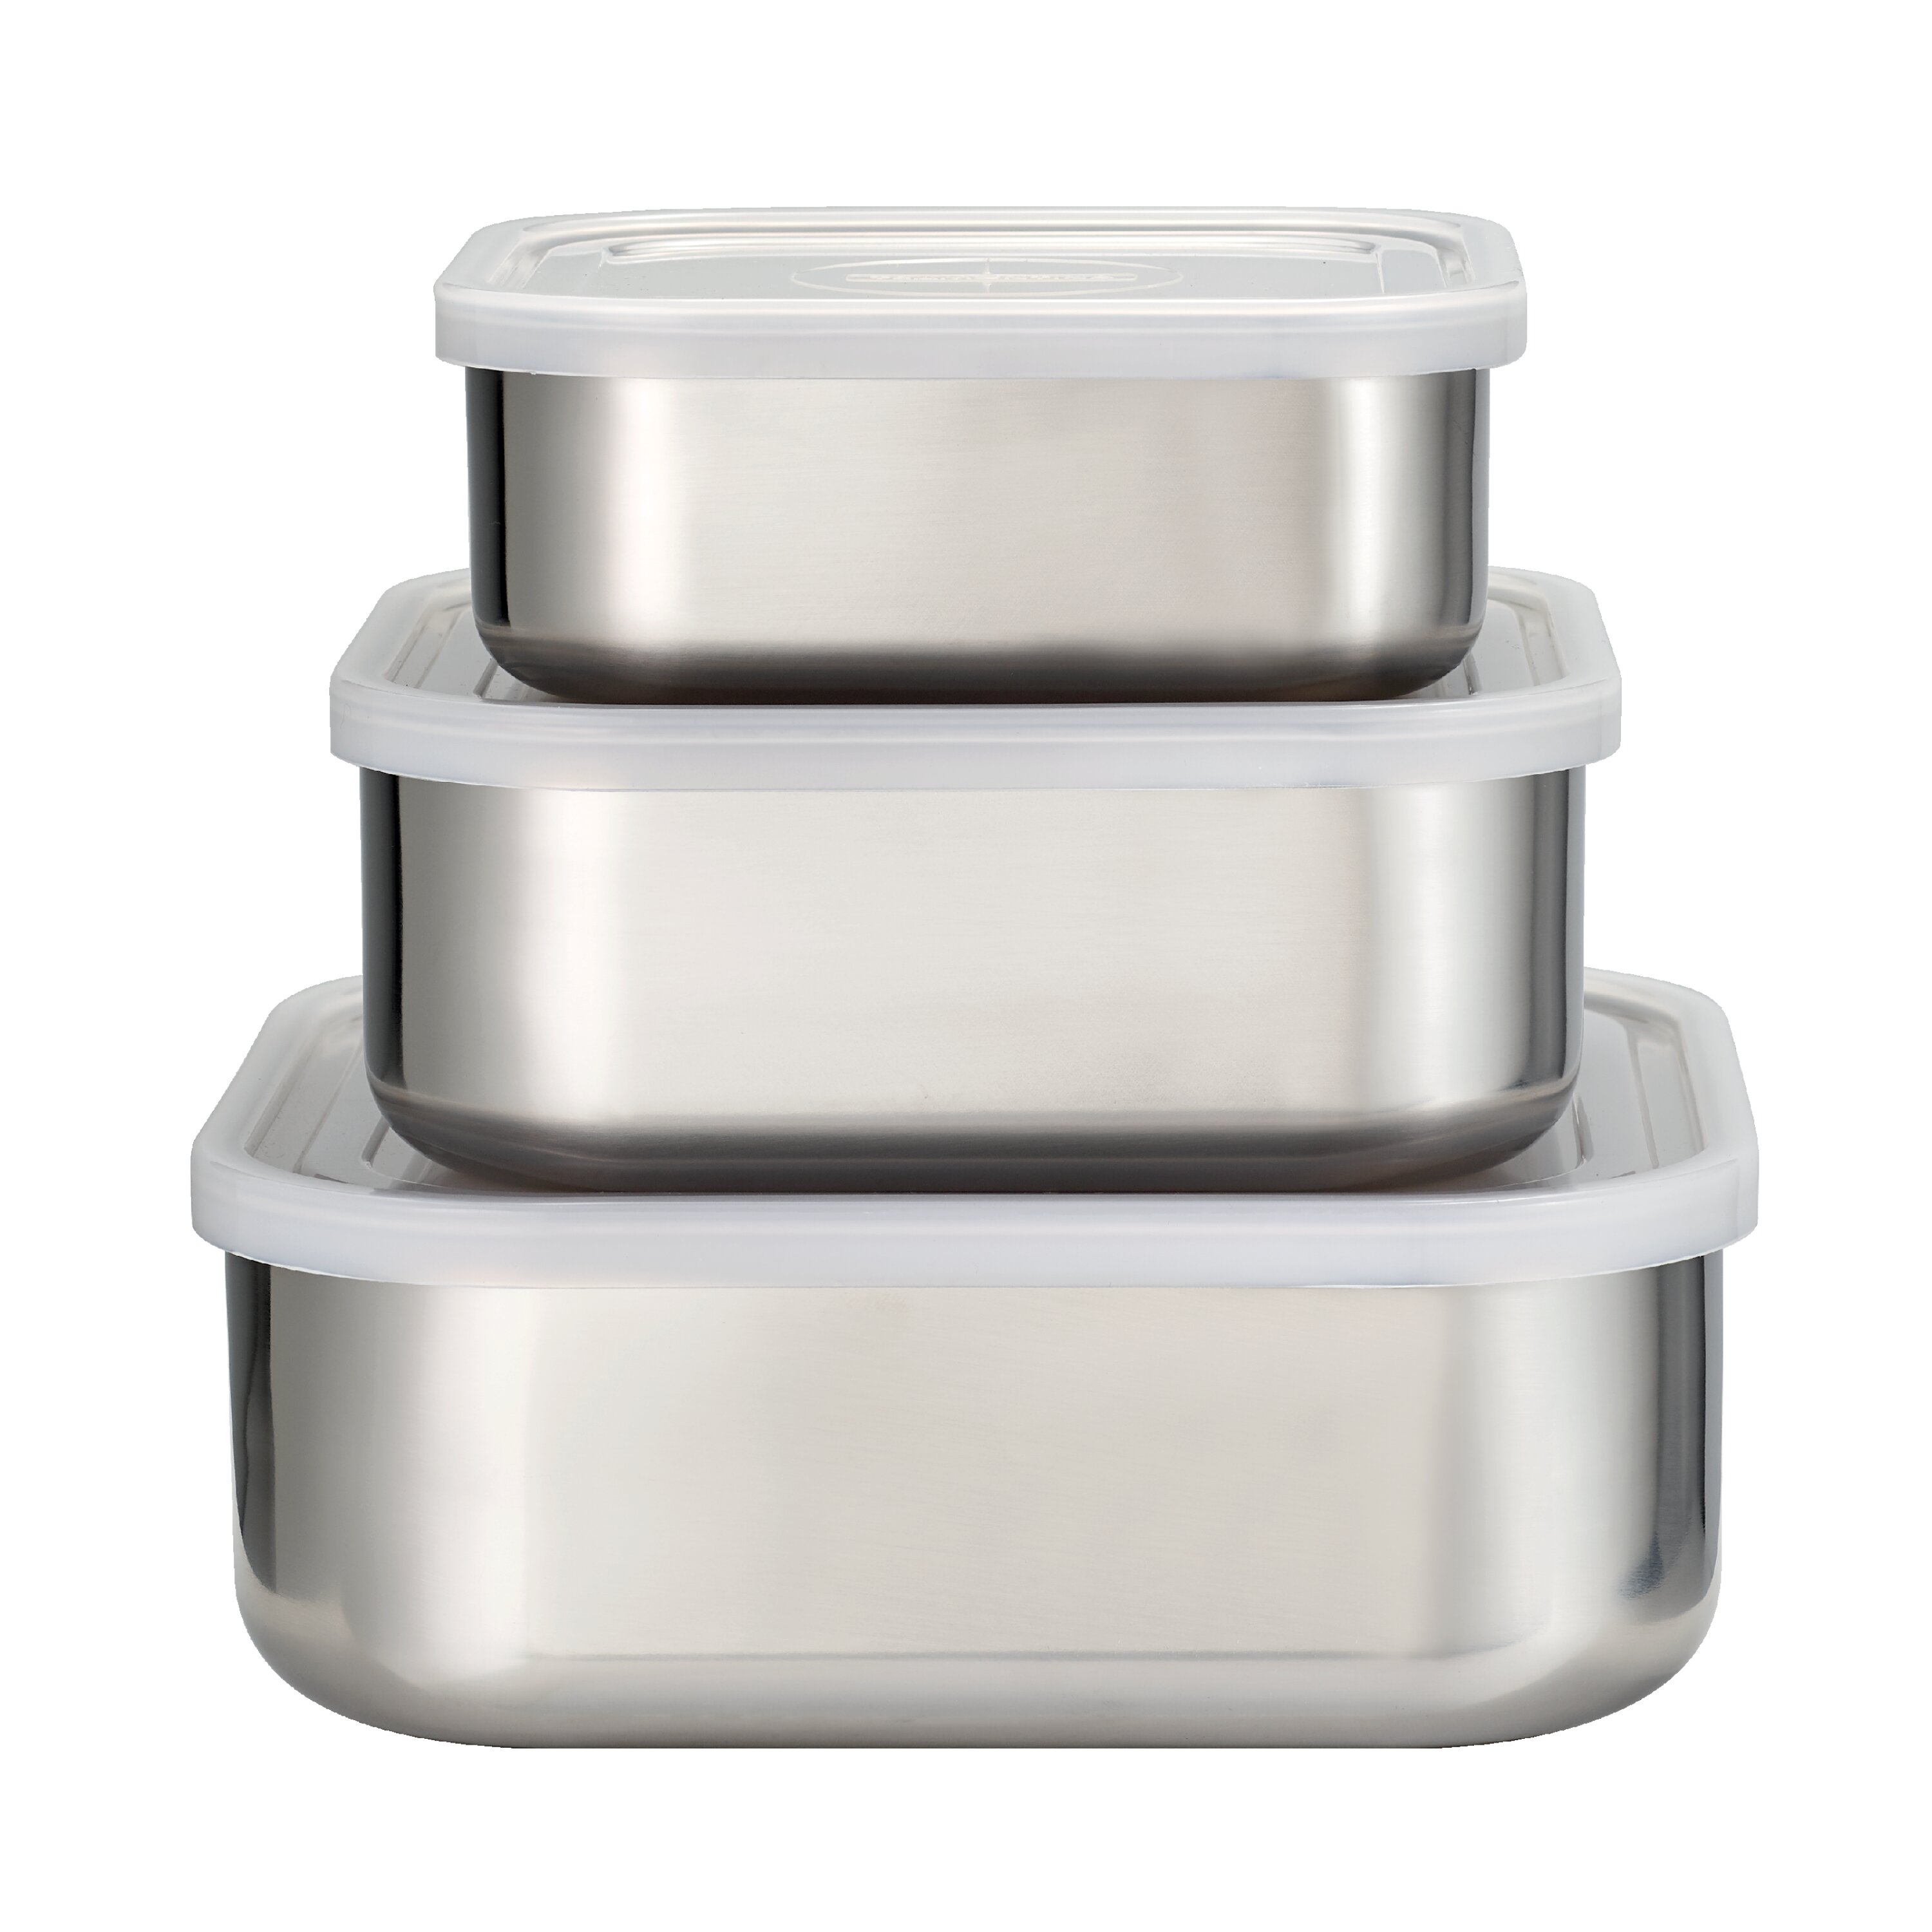 Stainless Steel Storage Box Set 3 Containers : Food Storage